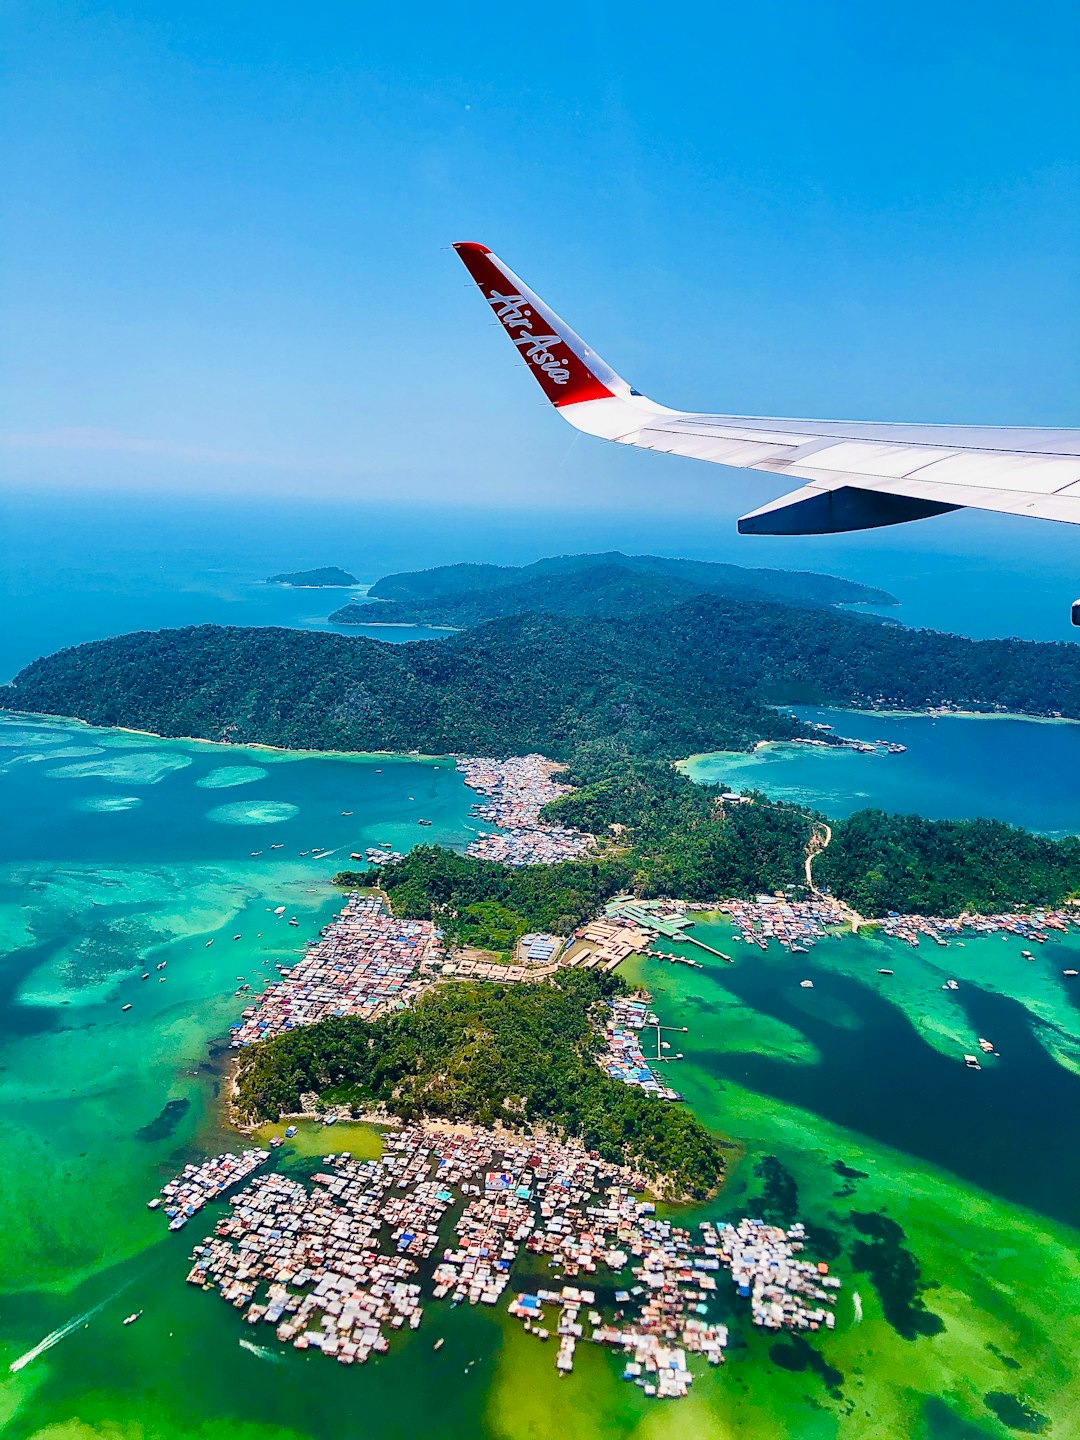 Travel Tips and Stories of Kota Kinabalu in Malaysia